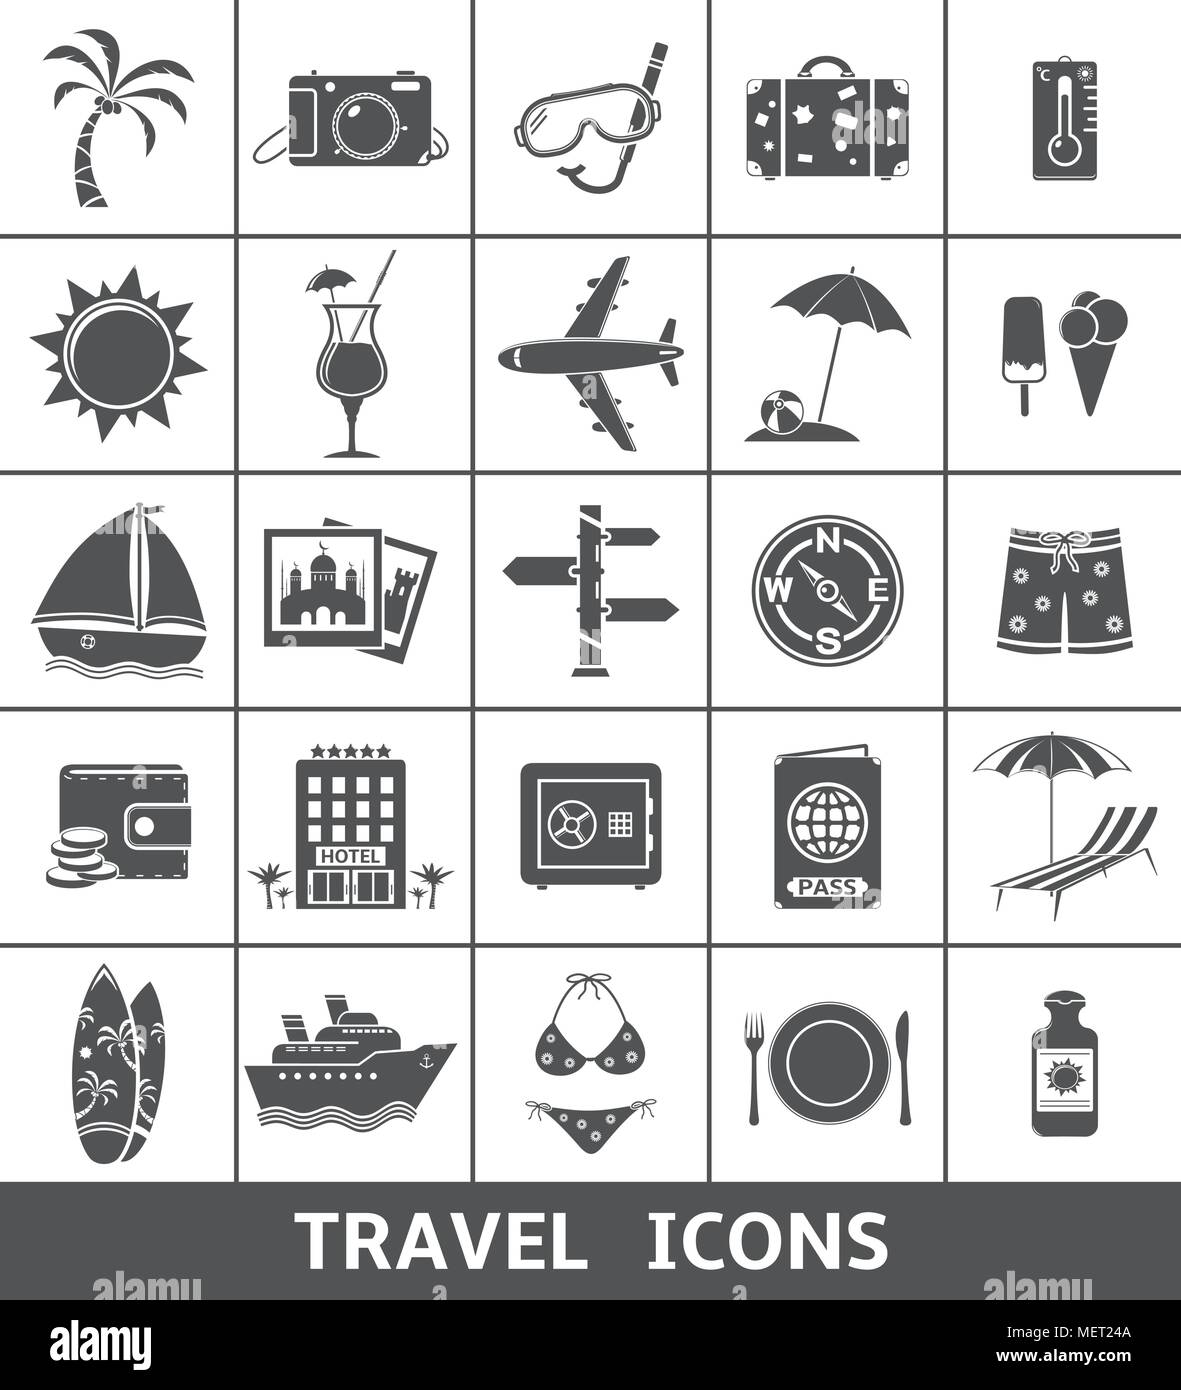 Travel and tourism icons set Stock Vector